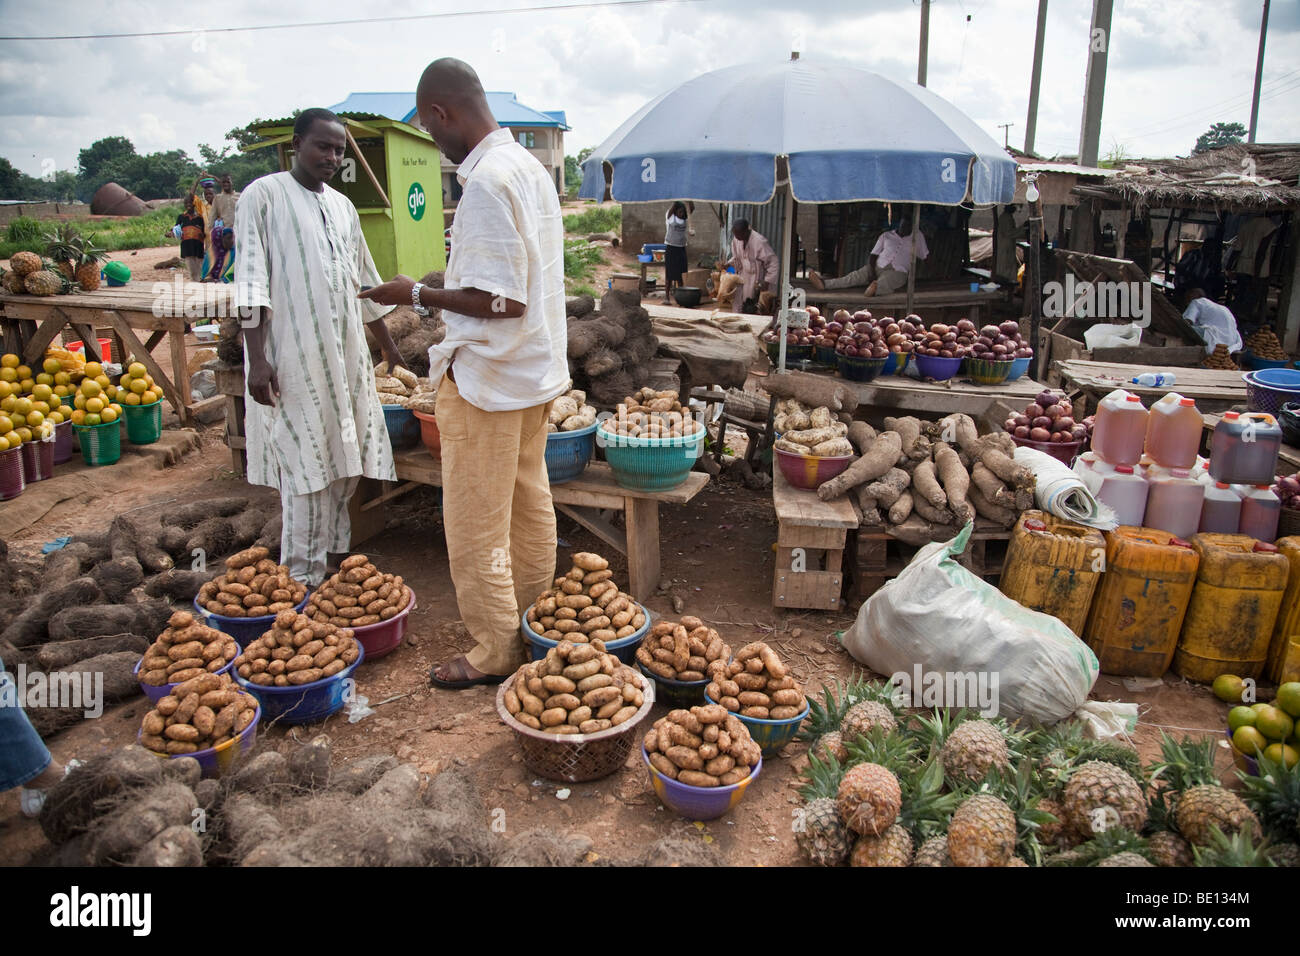 A man bargains for potatoes at a roadside market in Nigeria's Niger State. Stock Photo